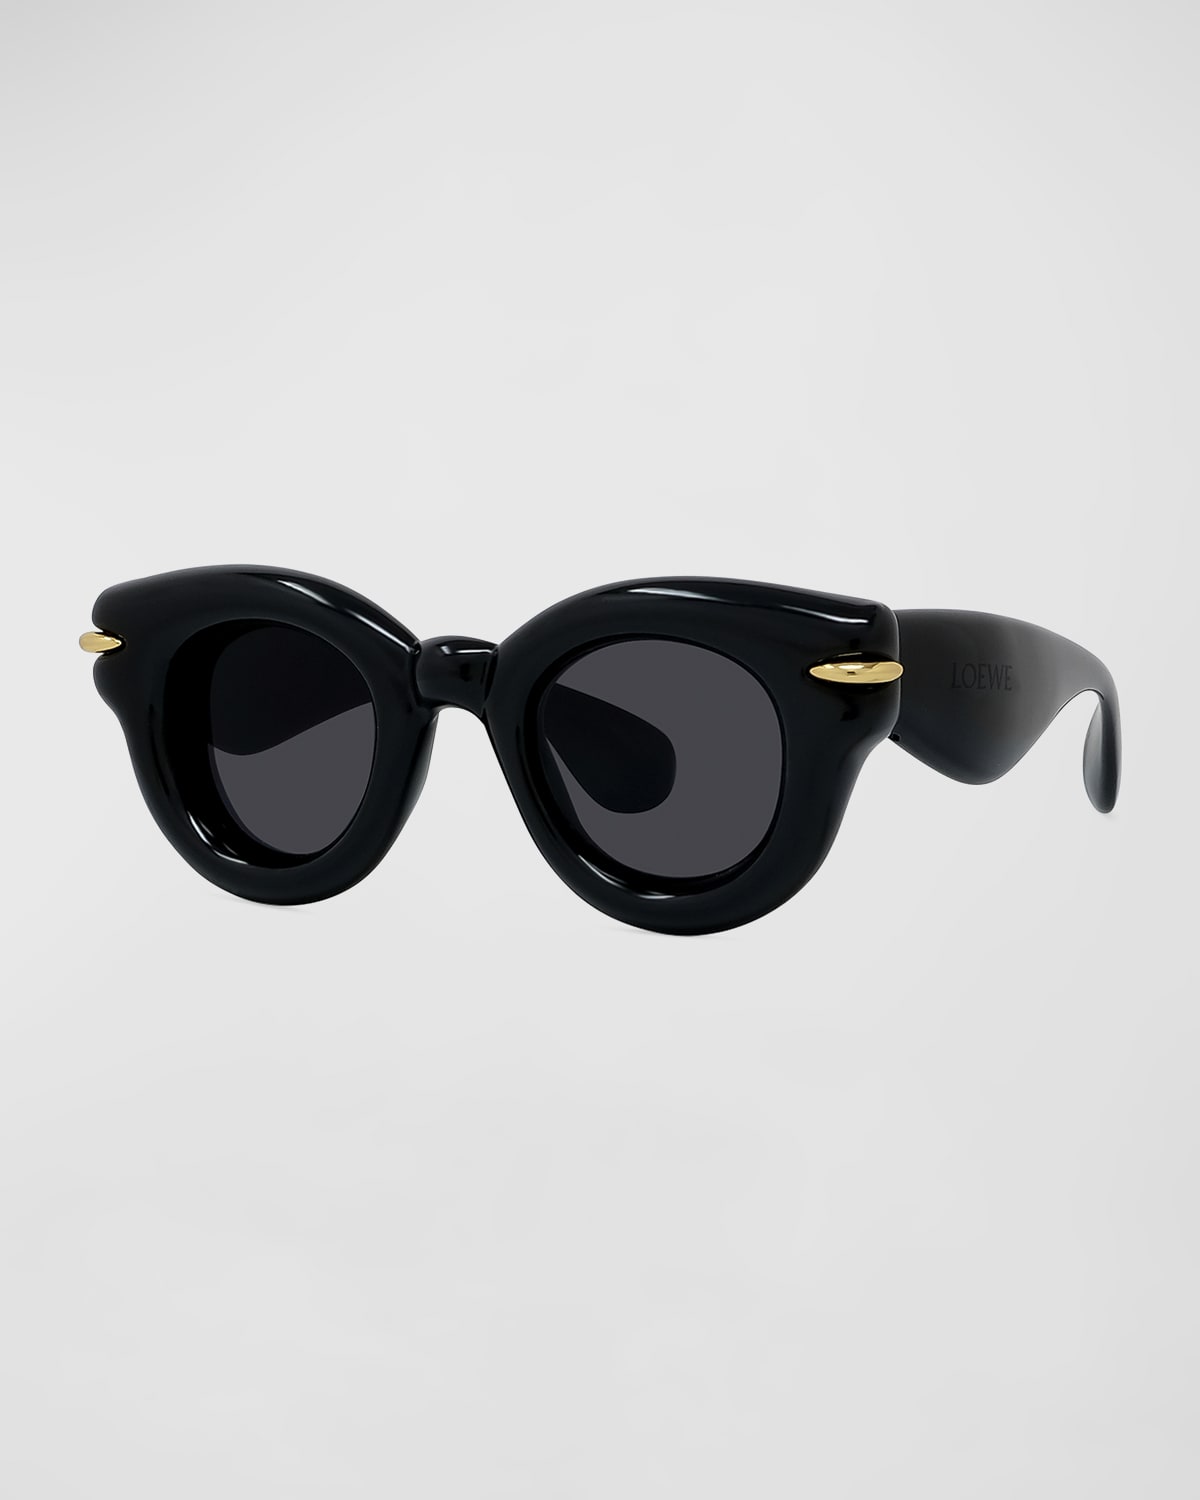 Loewe Inflated Trouseros Acetate Round Sunglasses In Sblk/smk